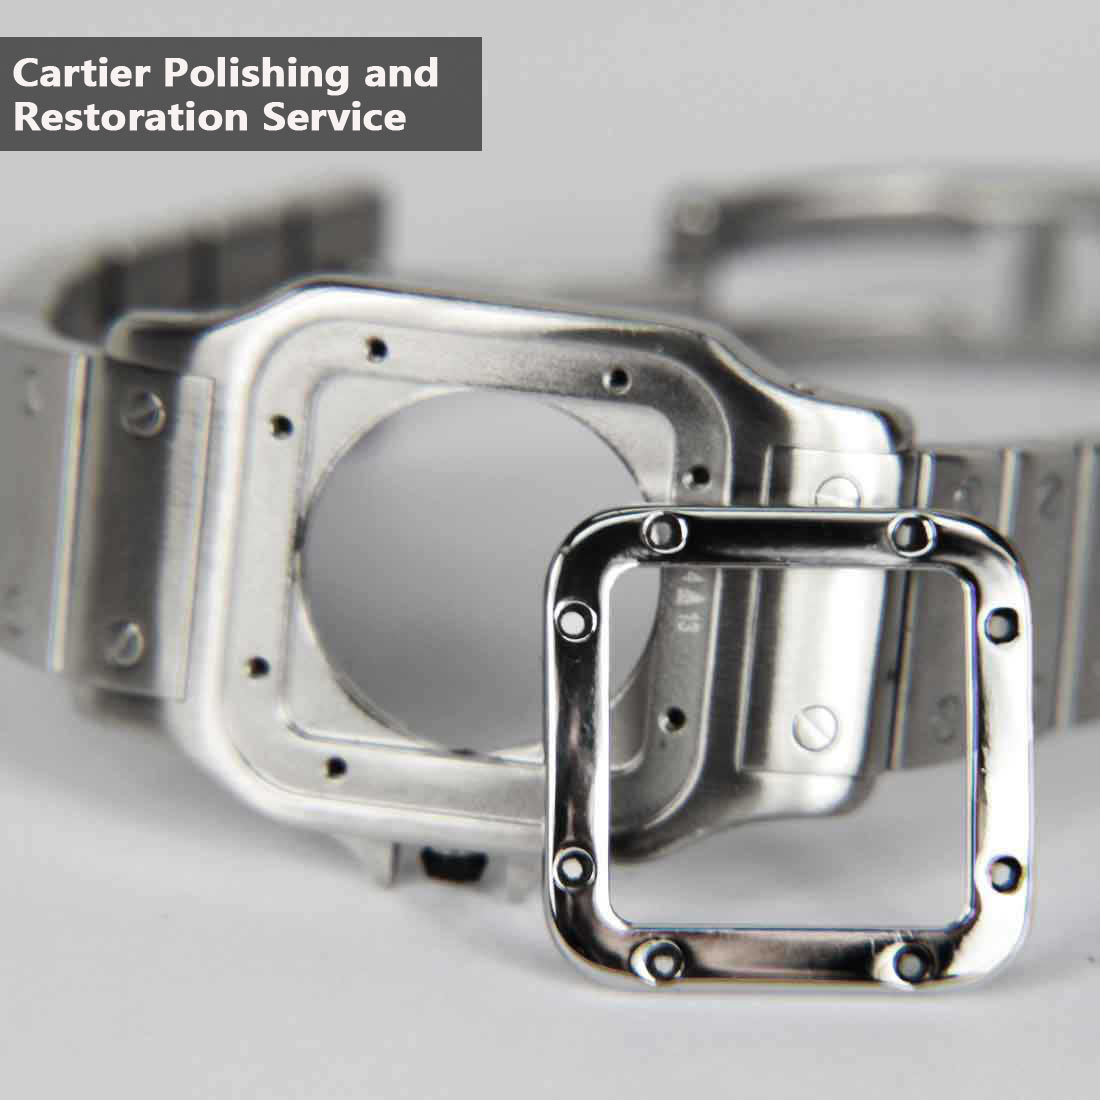 Polishing and restoration service for cartier watches